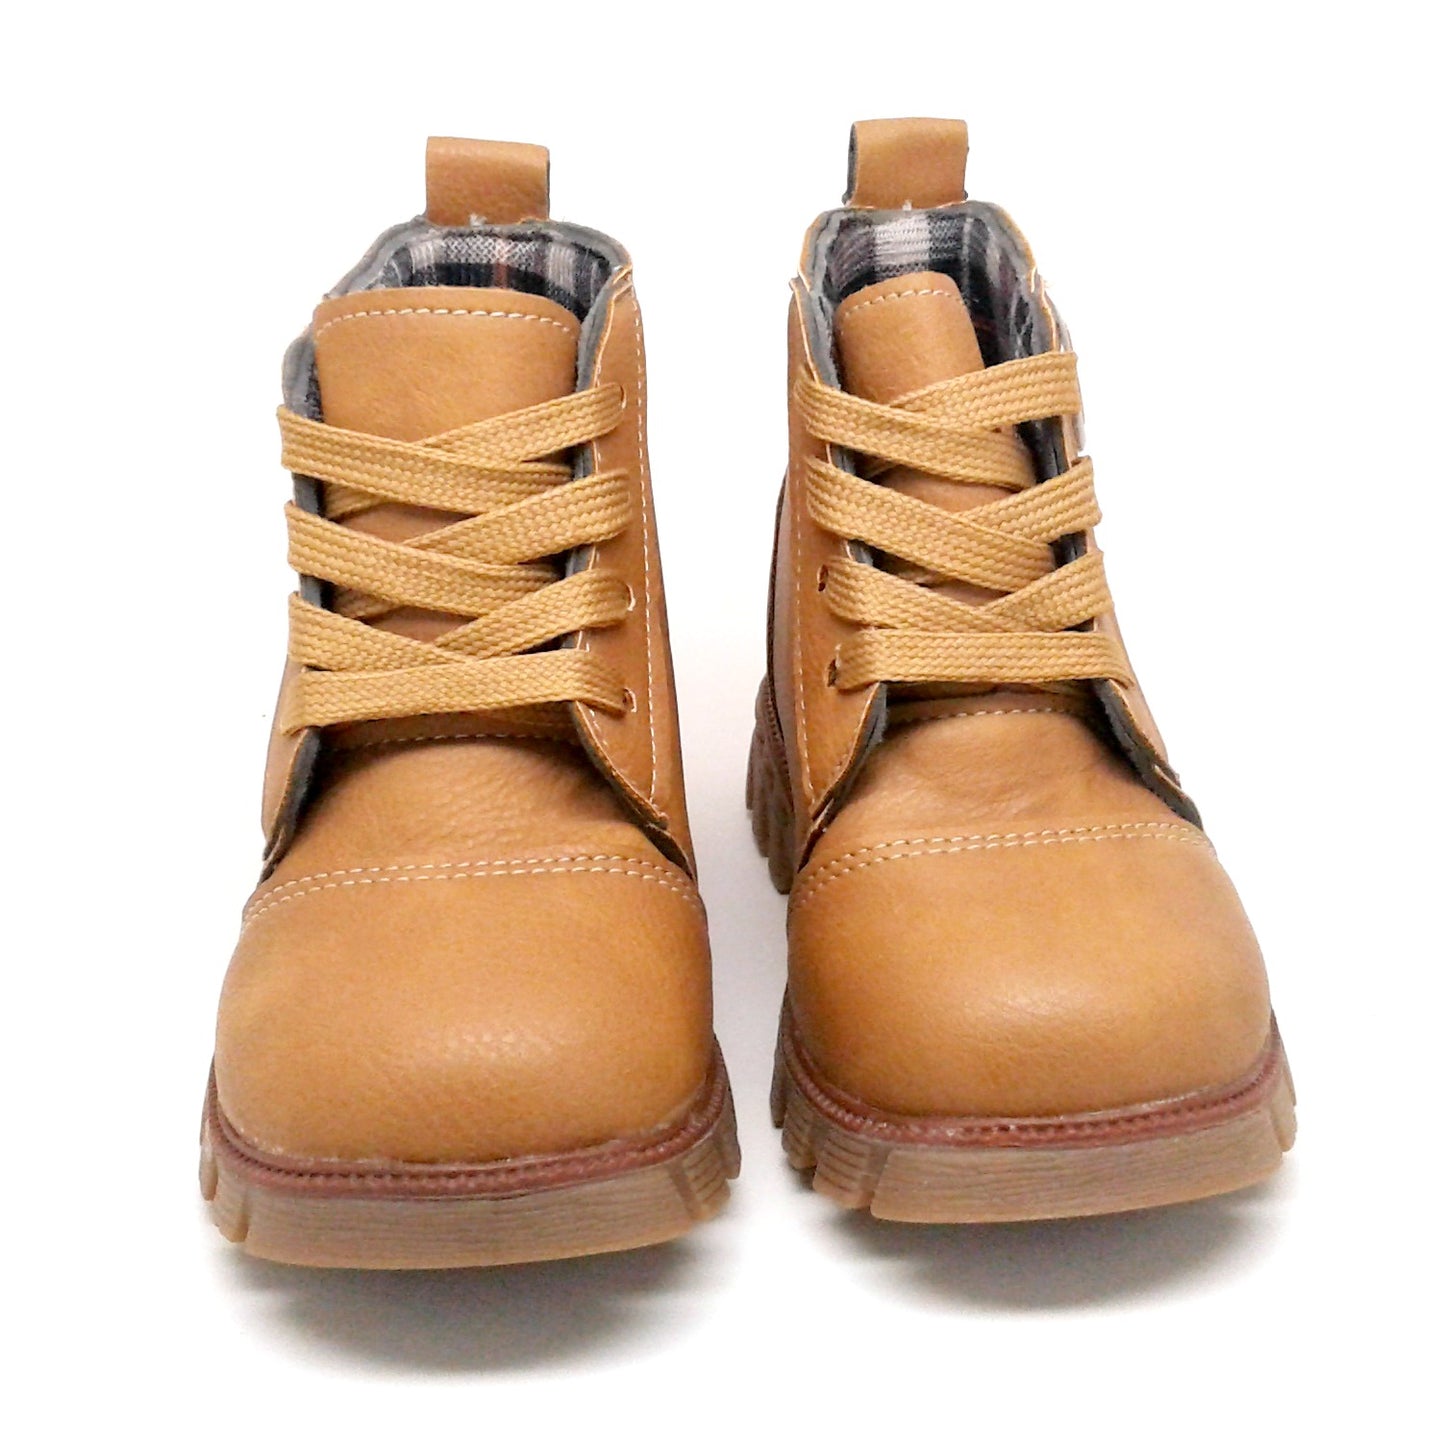 Toddler Boy Camel Color Boots with Laces